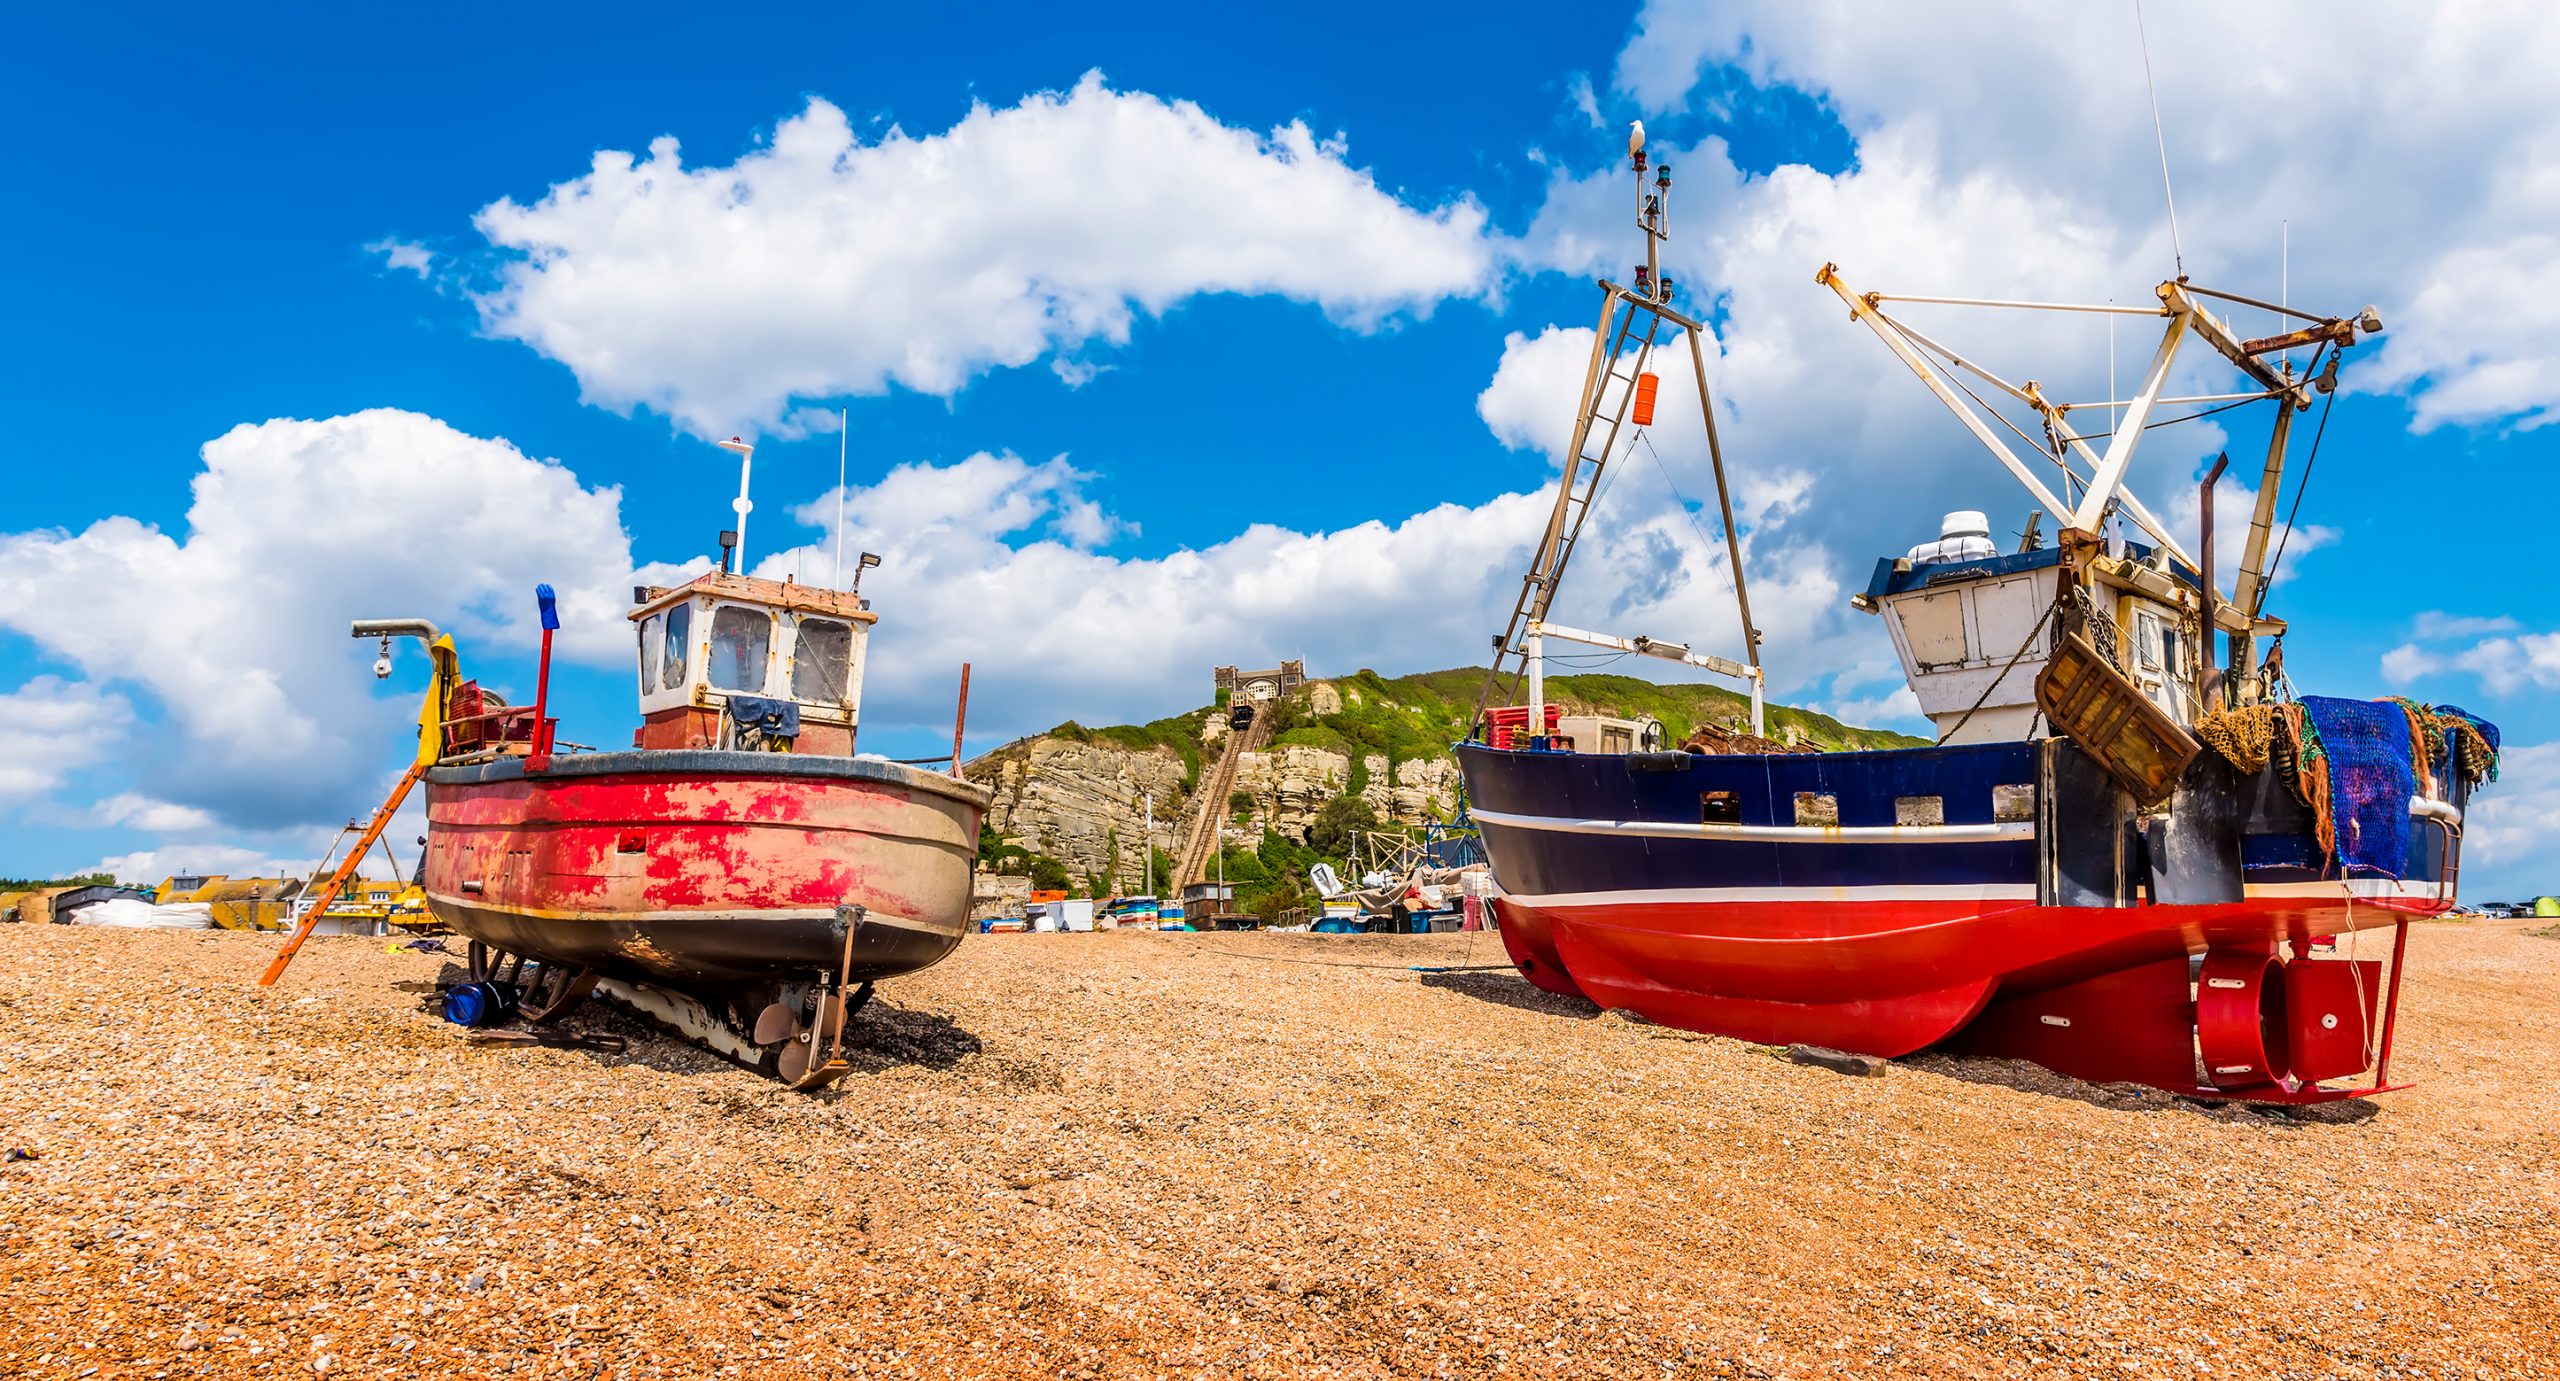 /app/uploads/2021/06/Fishing-Boats-in-Sussex-credit-Nicola-Pulham-scaled.jpg